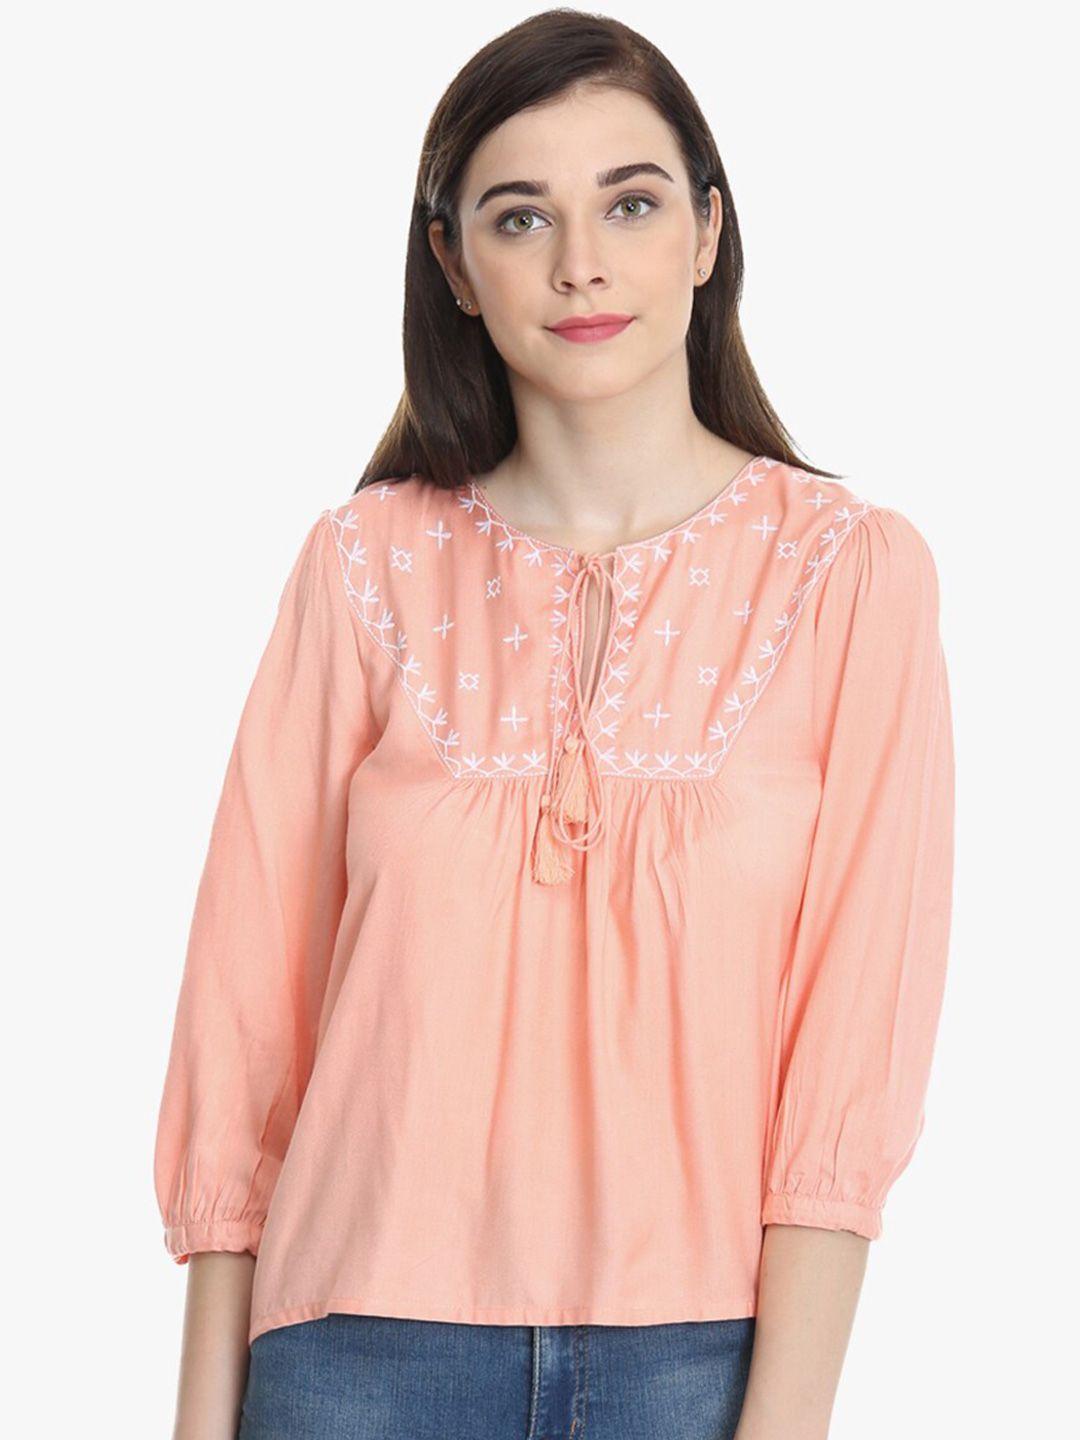 dodo-&-moa-peach-coloured-floral-embroidered-tie-up-neck-peplum-top